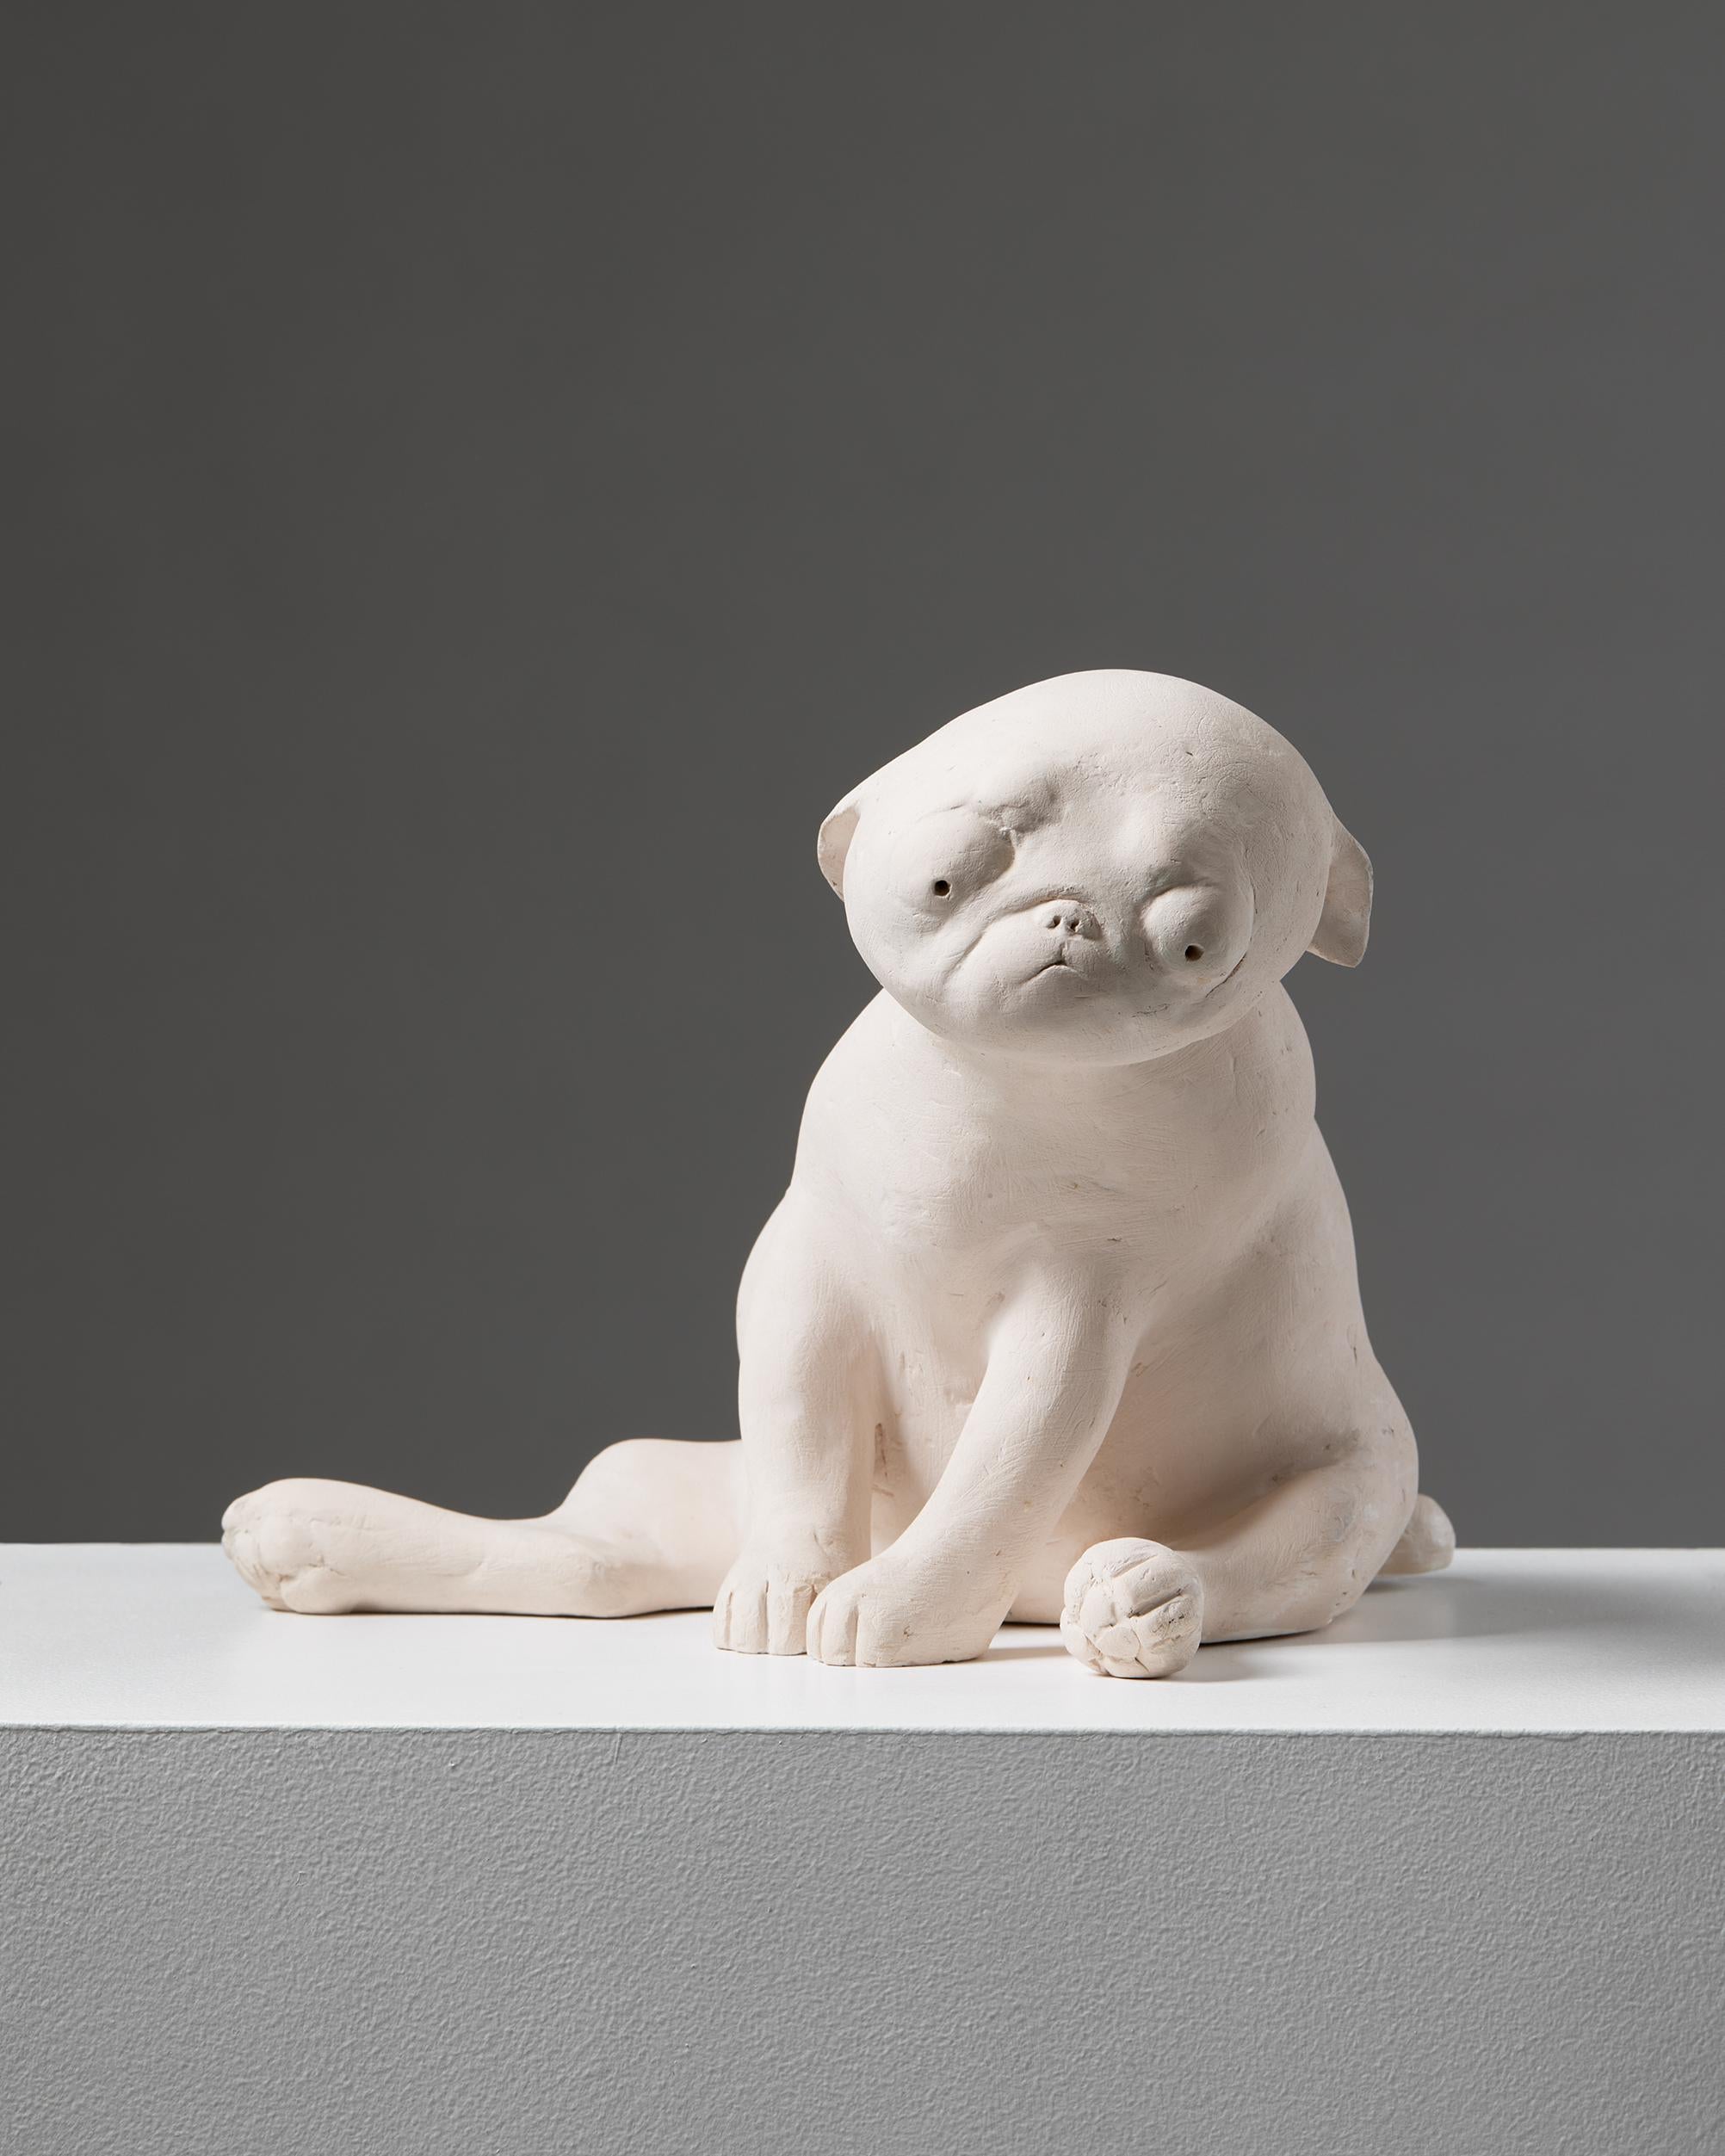 Sculpture 'Puppy in the World' by Sonja Petterson, Sweden, 2000.

Signed.

Sonja Petterson was a Swedish sculptor. She studied at Konstfack—the Stockholm University of Arts, Crafts and Design. Her sculptures typically depict animals that show human